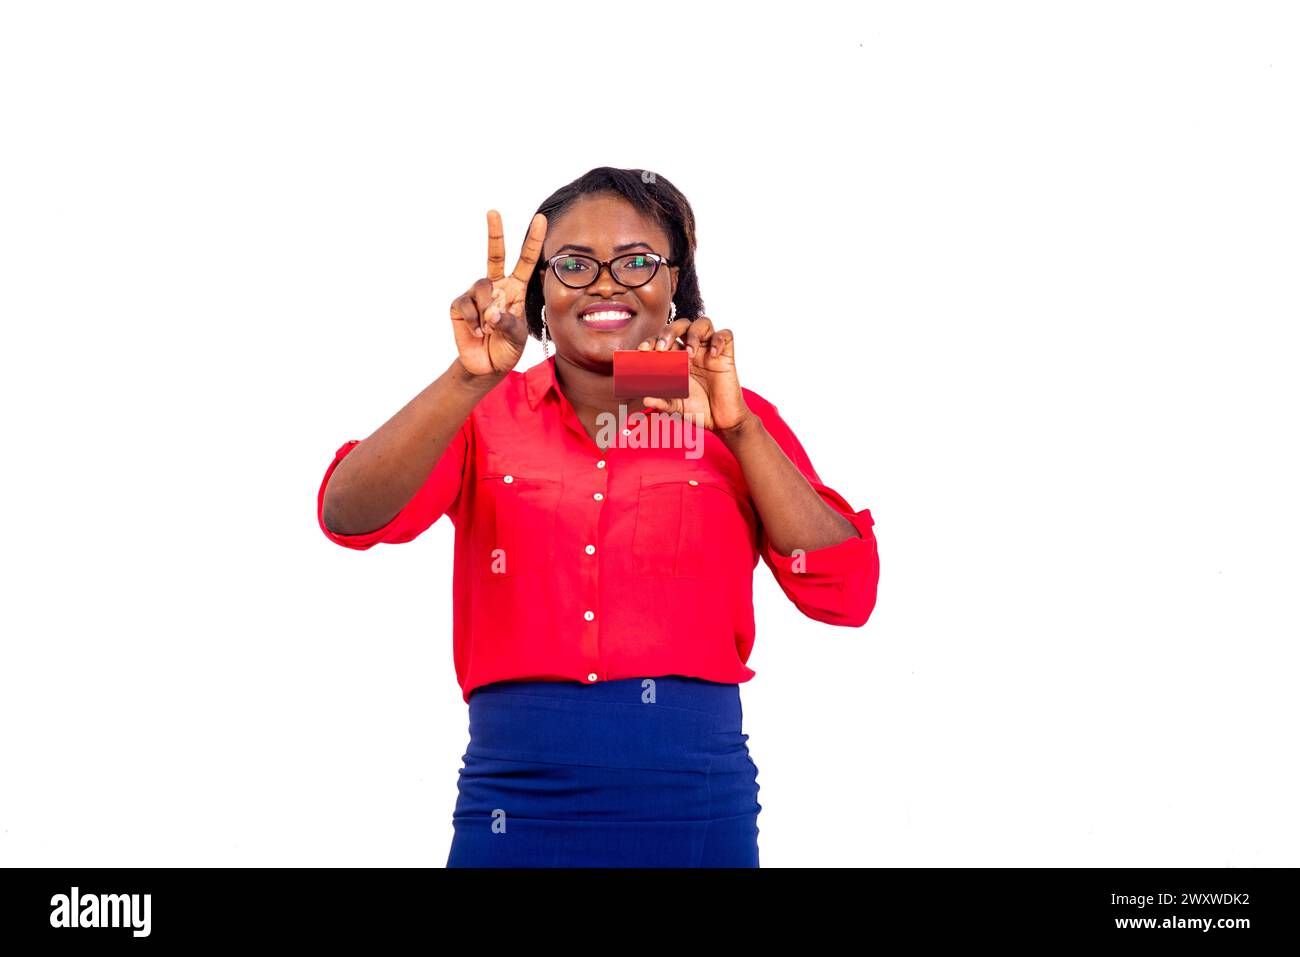 beautiful adult business woman wearing optical glasses holding credit card and making victory sign with fingers while smiling. Stock Photo